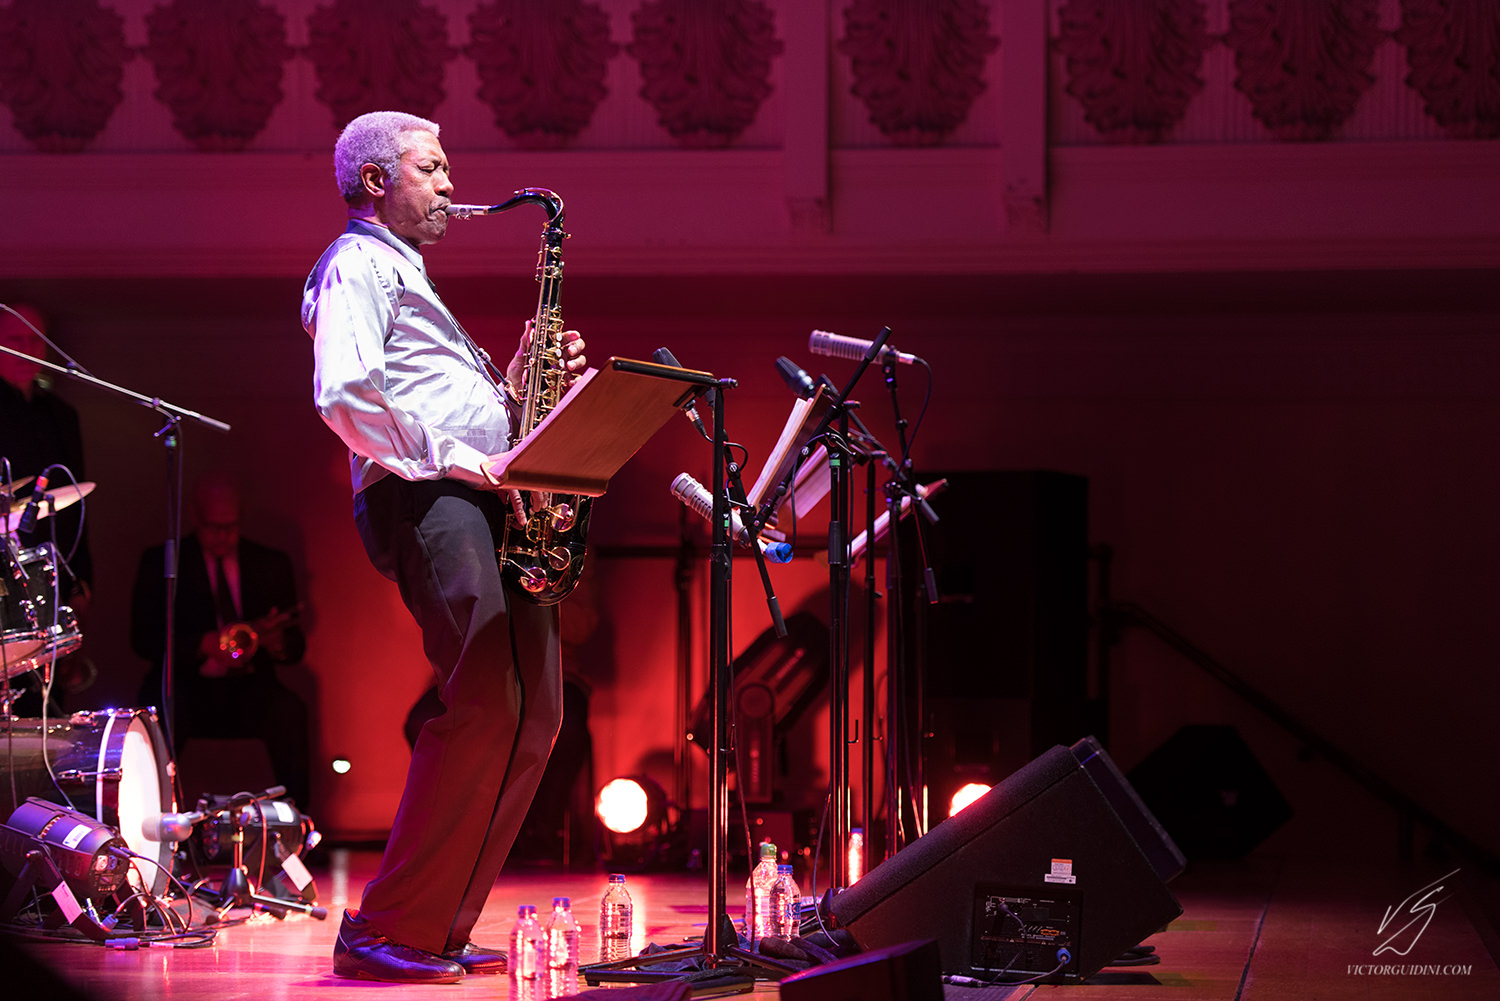 The Cookers at Cadogan Hall London Jazz Festival